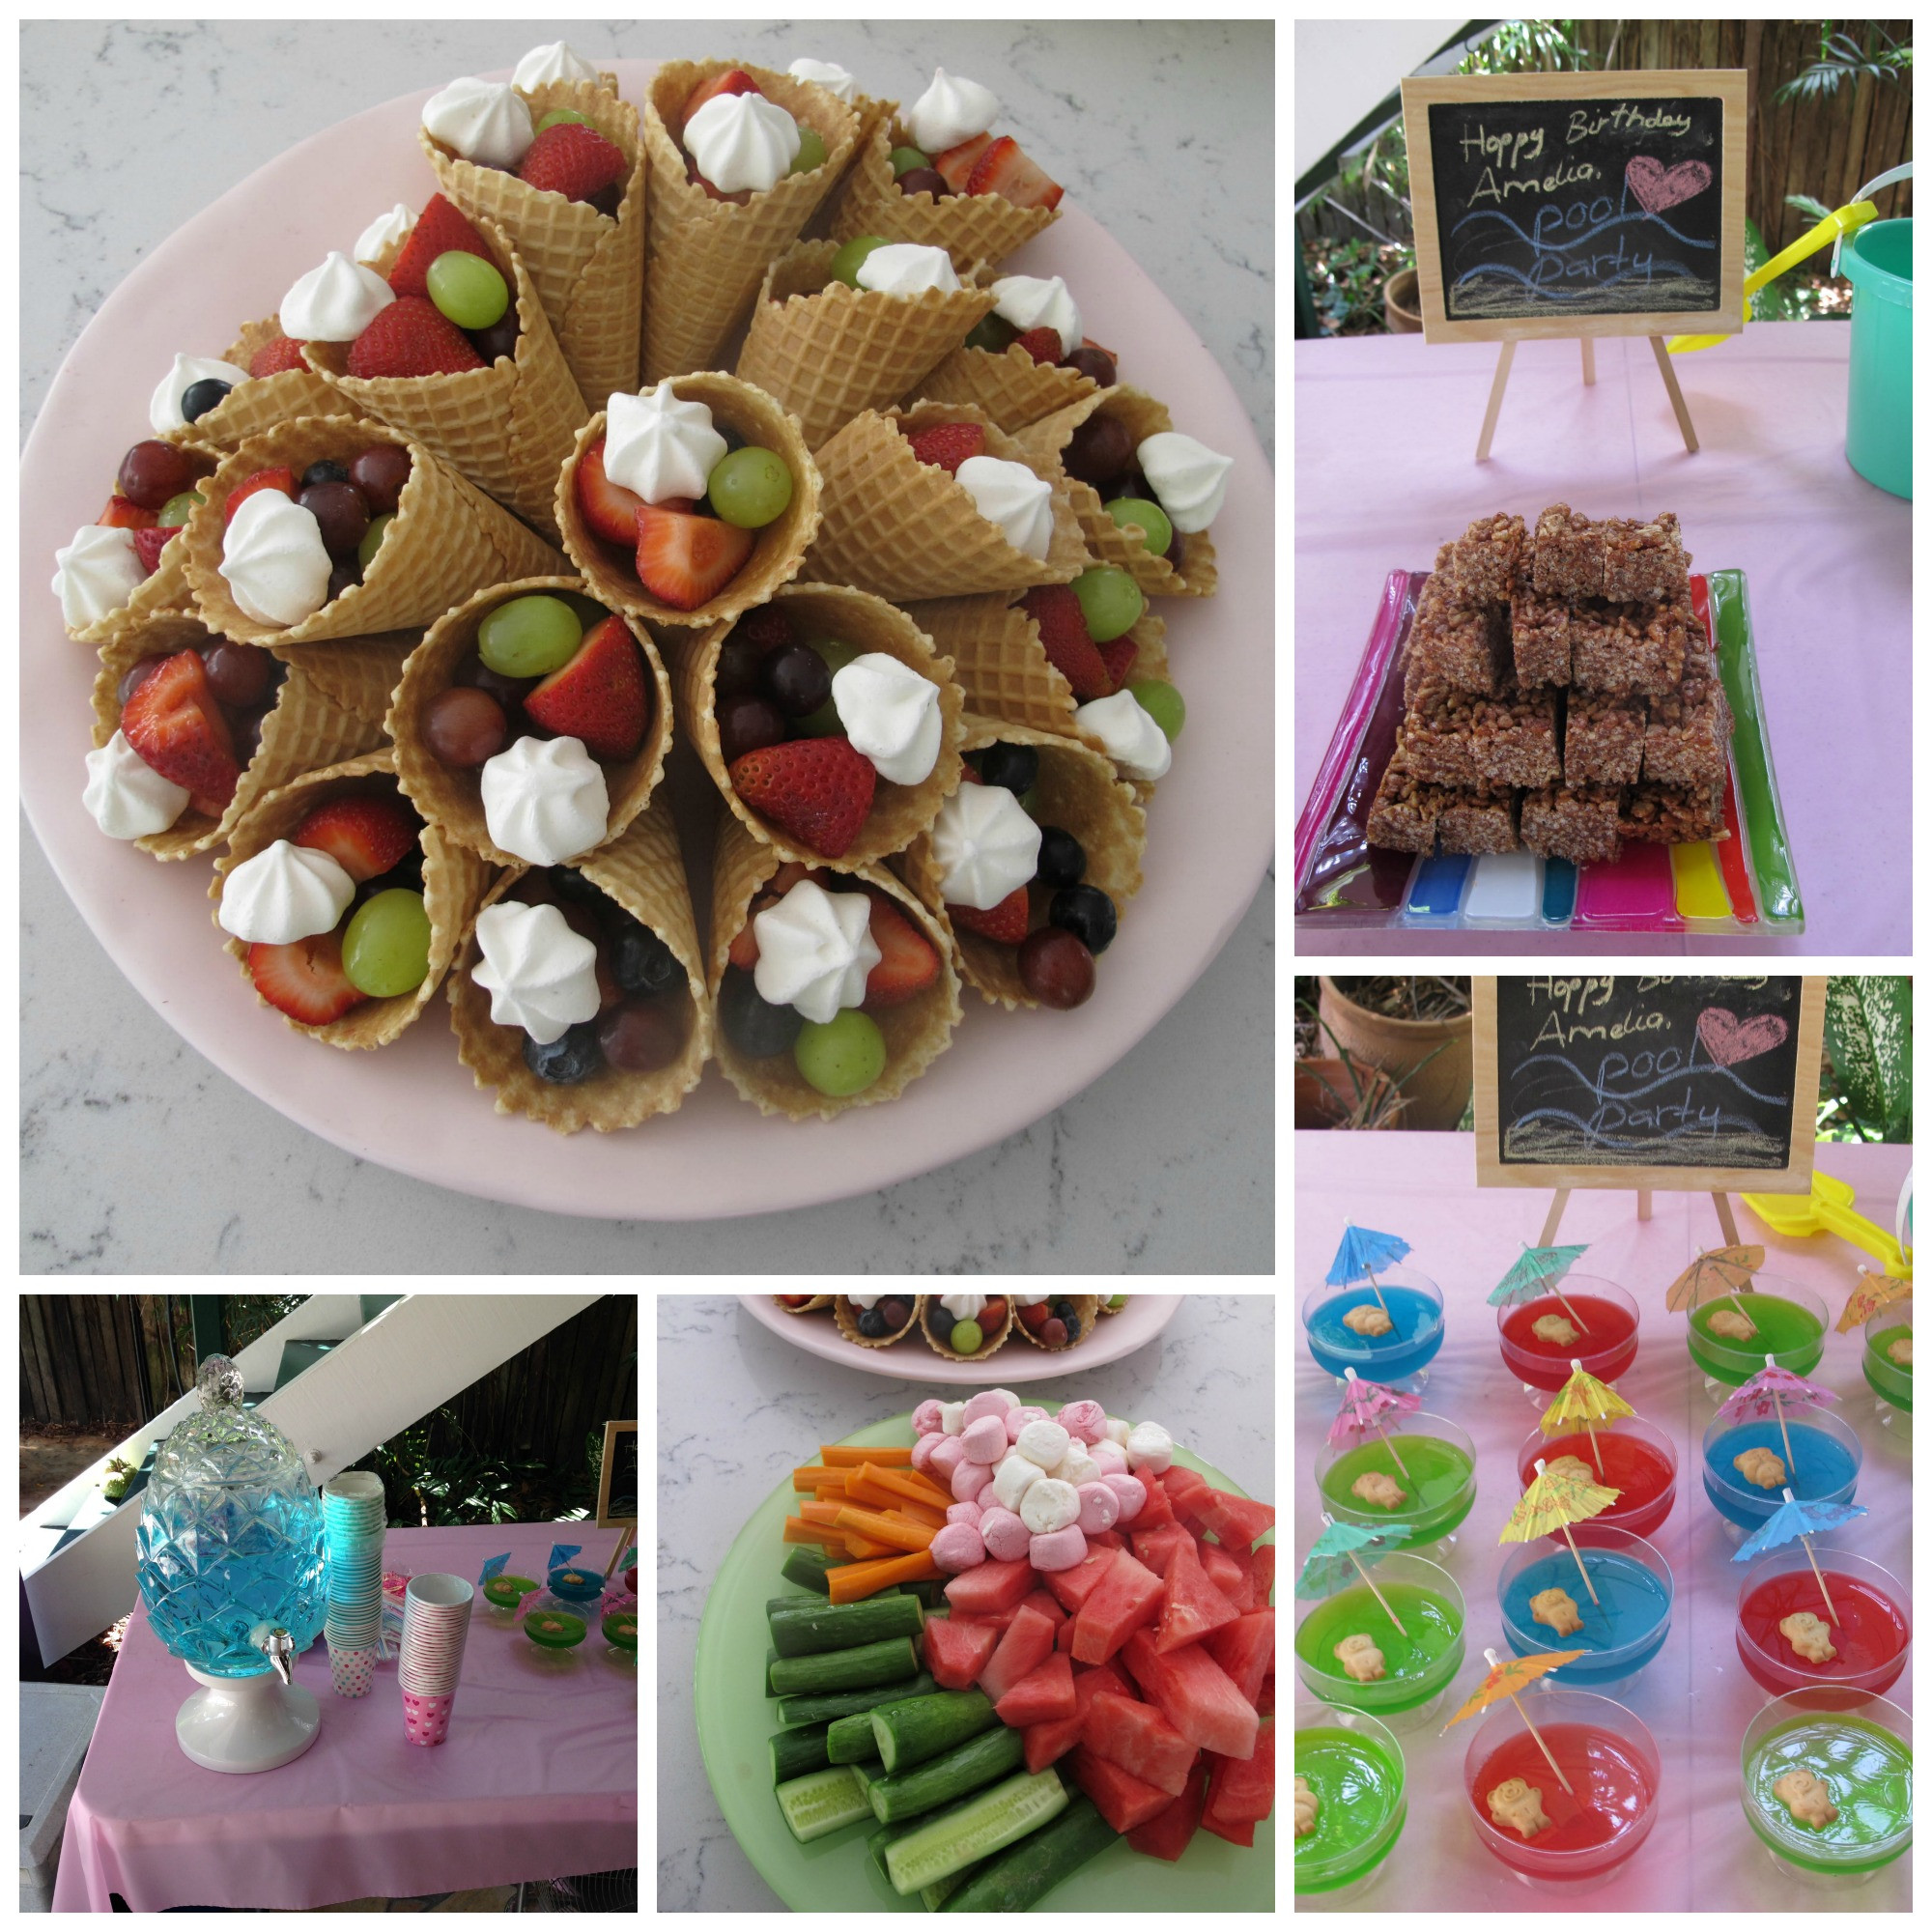 Food Ideas For Pool Party
 Birthday Pool Party Tips Tricks and Cake hint have